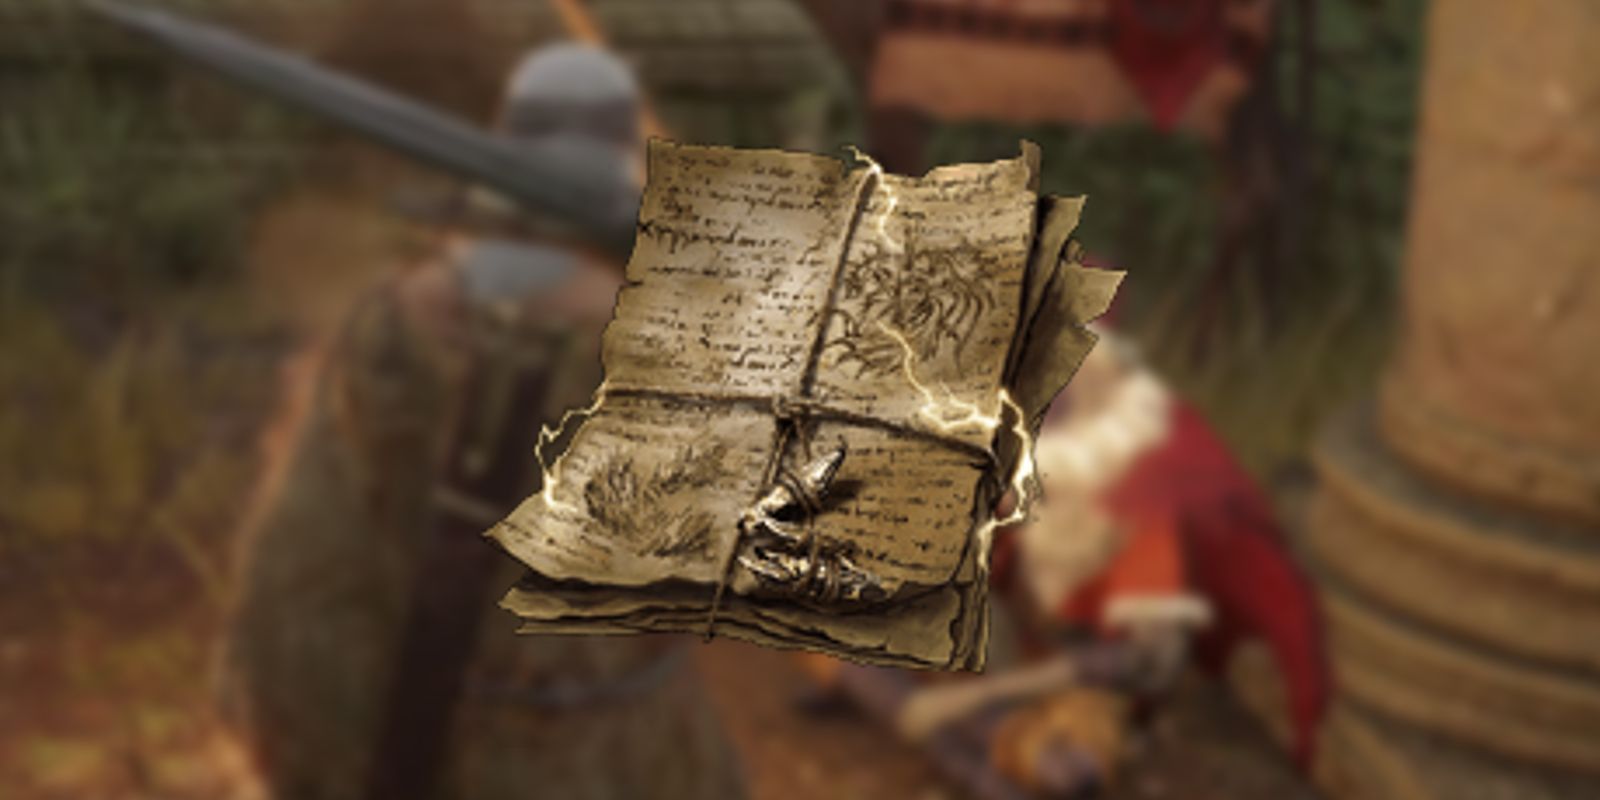 The Ancient Dragon Apostle's Cookbook in Elden Ring.